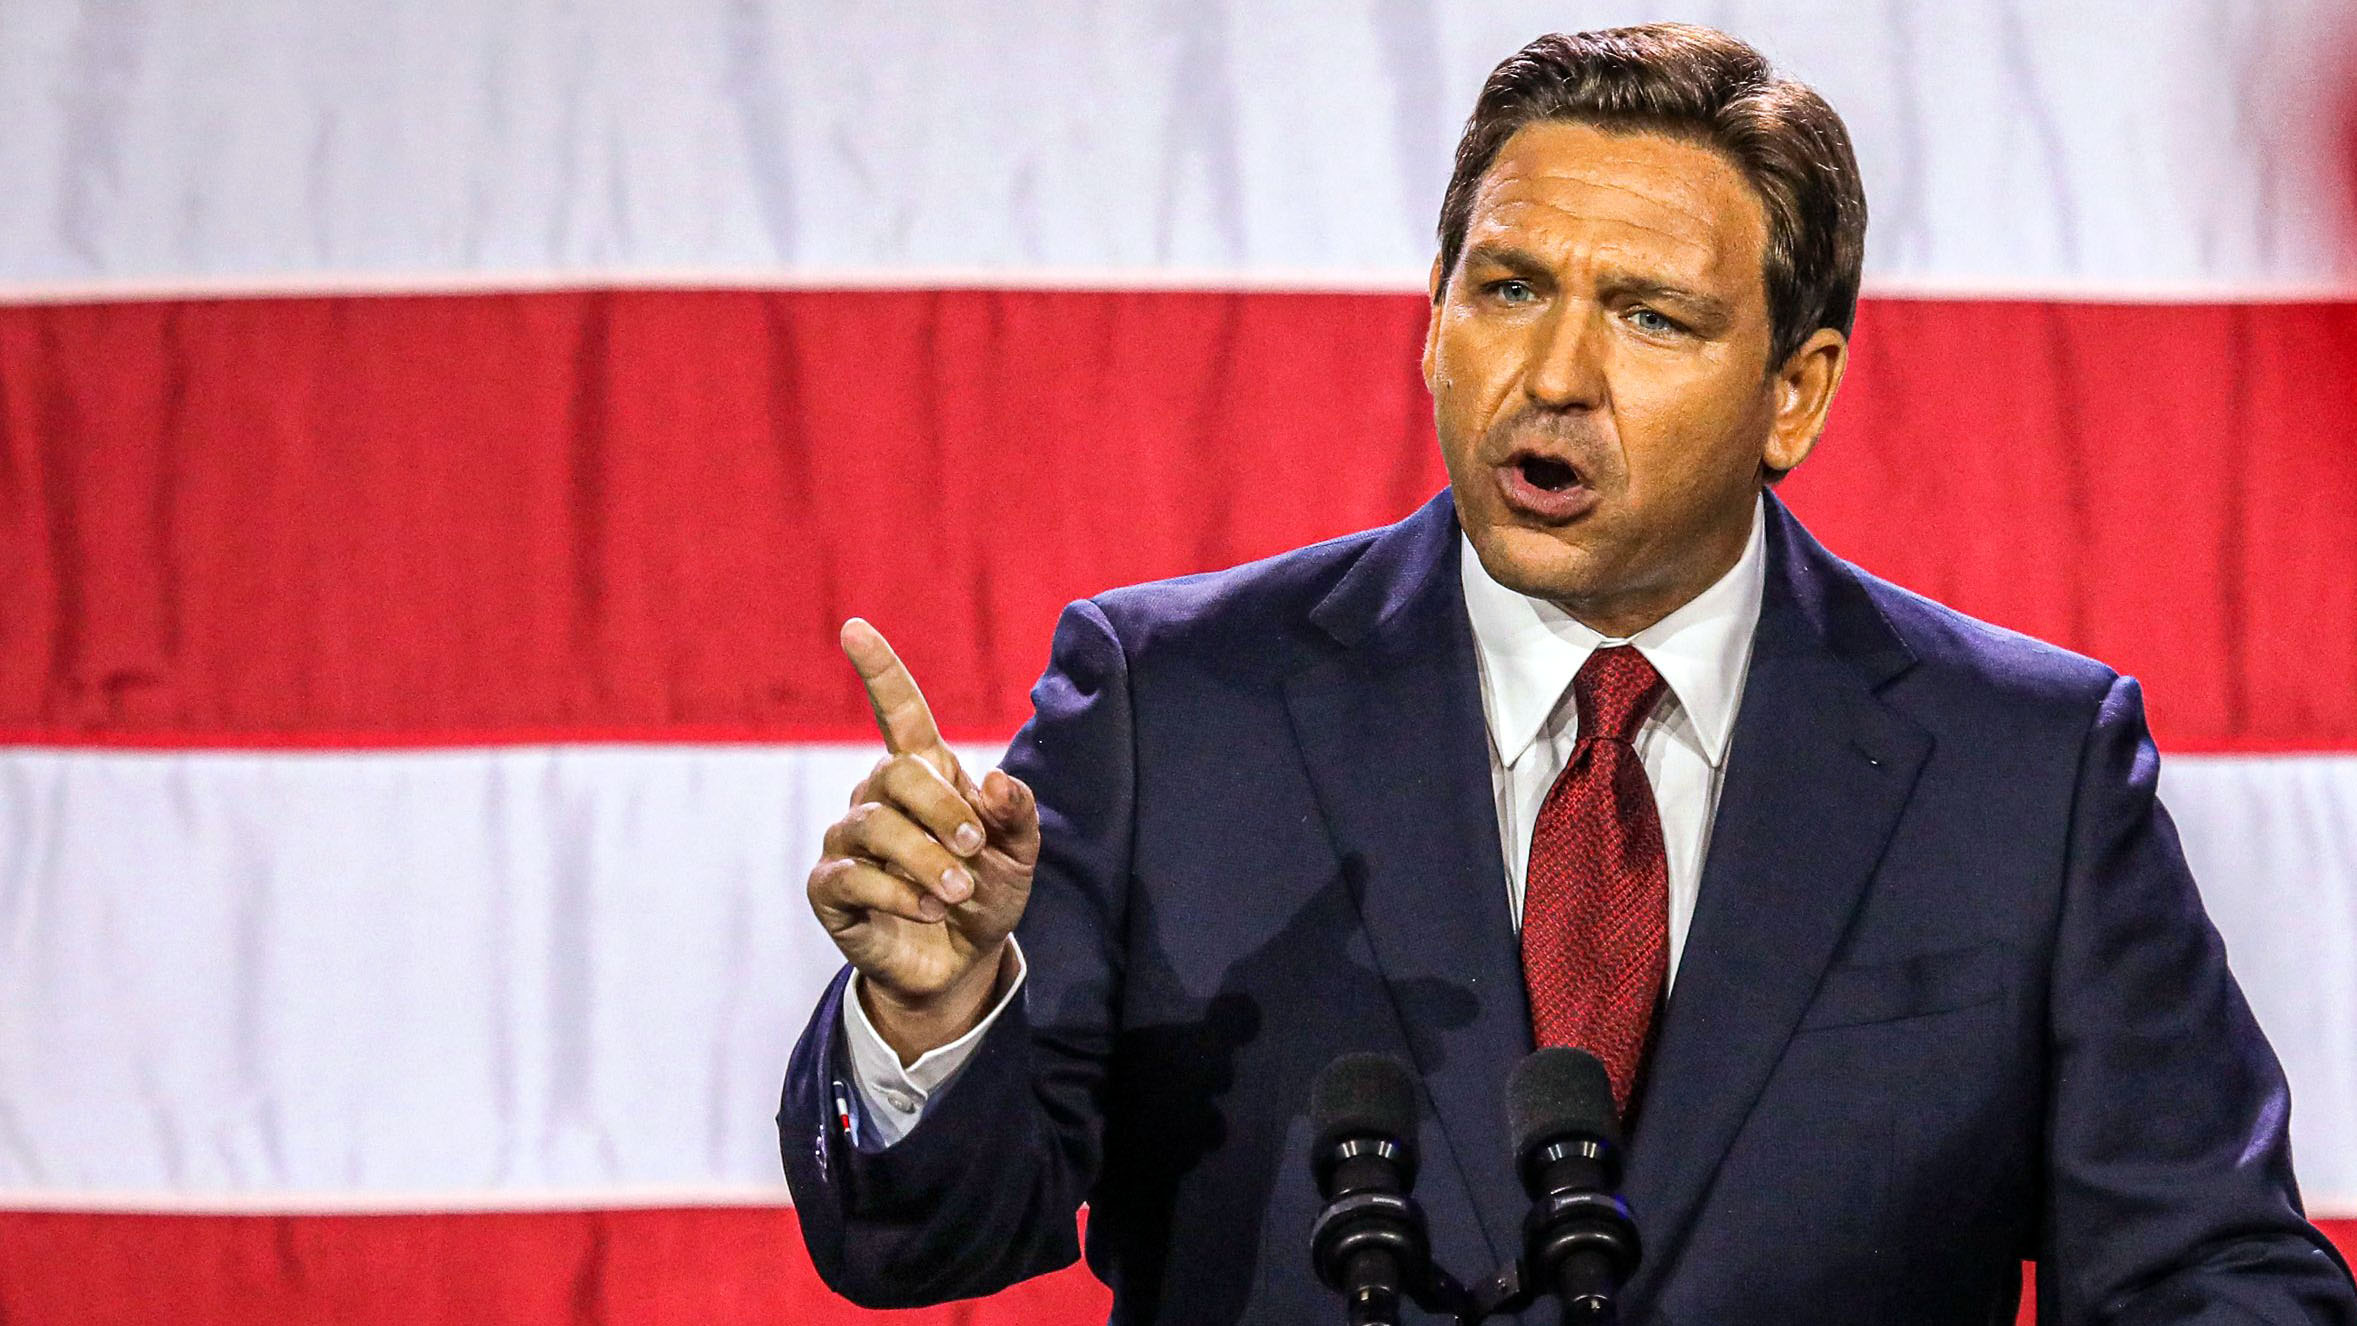 DeSantis Fires Back At Biden For Claiming It’s ‘Sinful’ To Protect Minors From Trans Surgeries